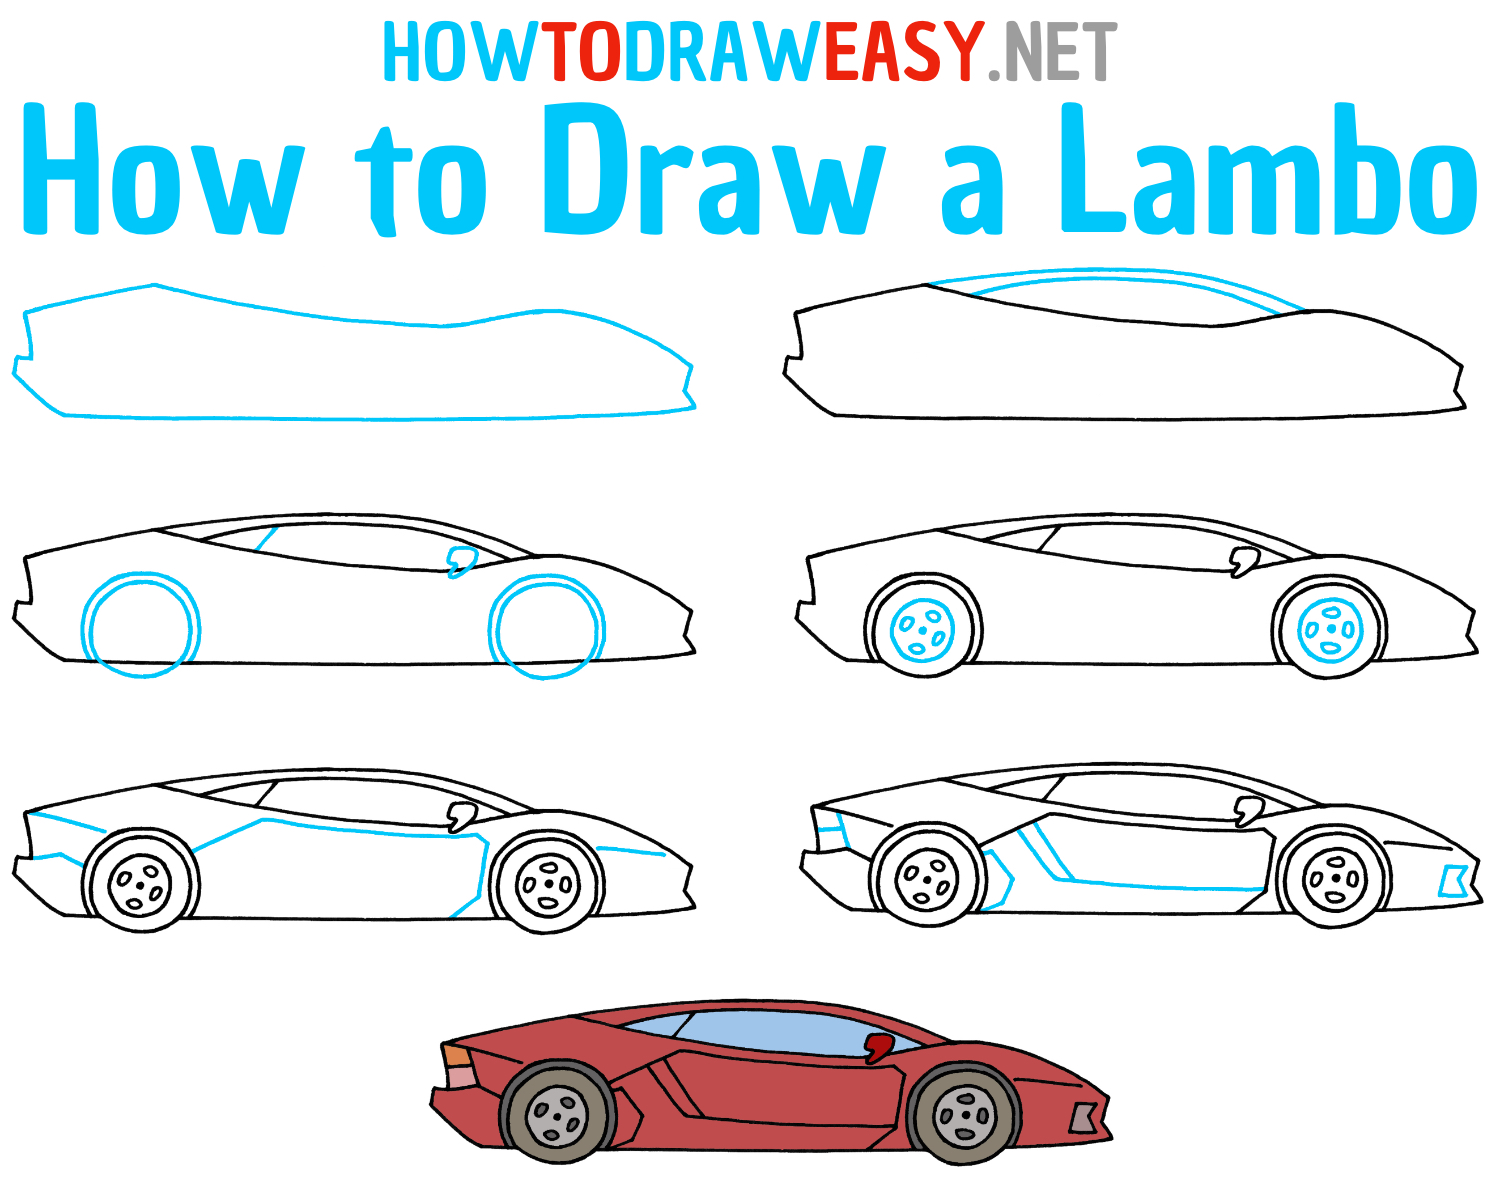 How to Draw a Lambo Step by Step